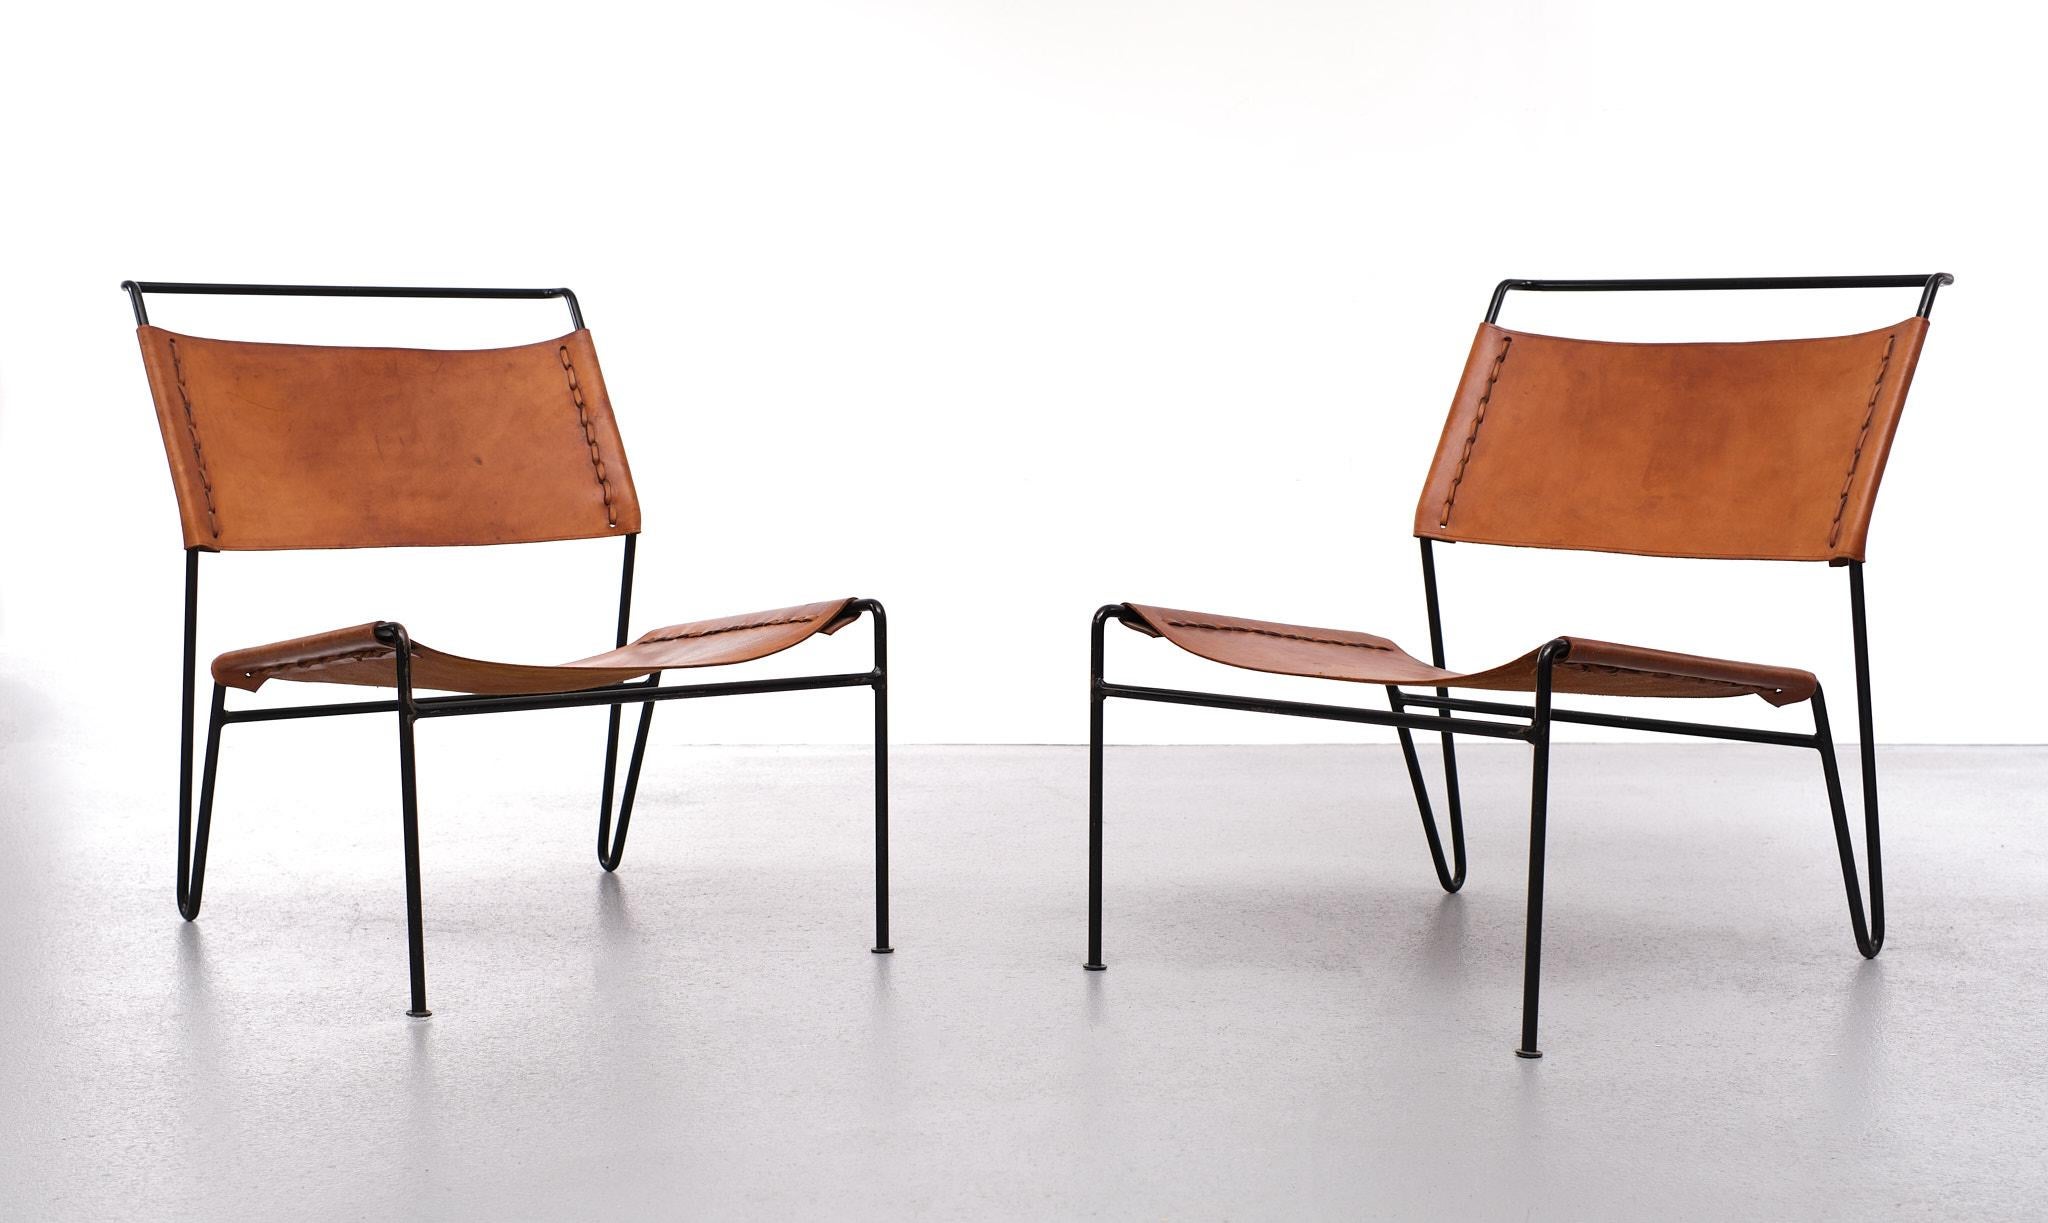 Pair of A. Dolleman Chairs for Metz & Co, Netherlands, 1950 For Sale 3